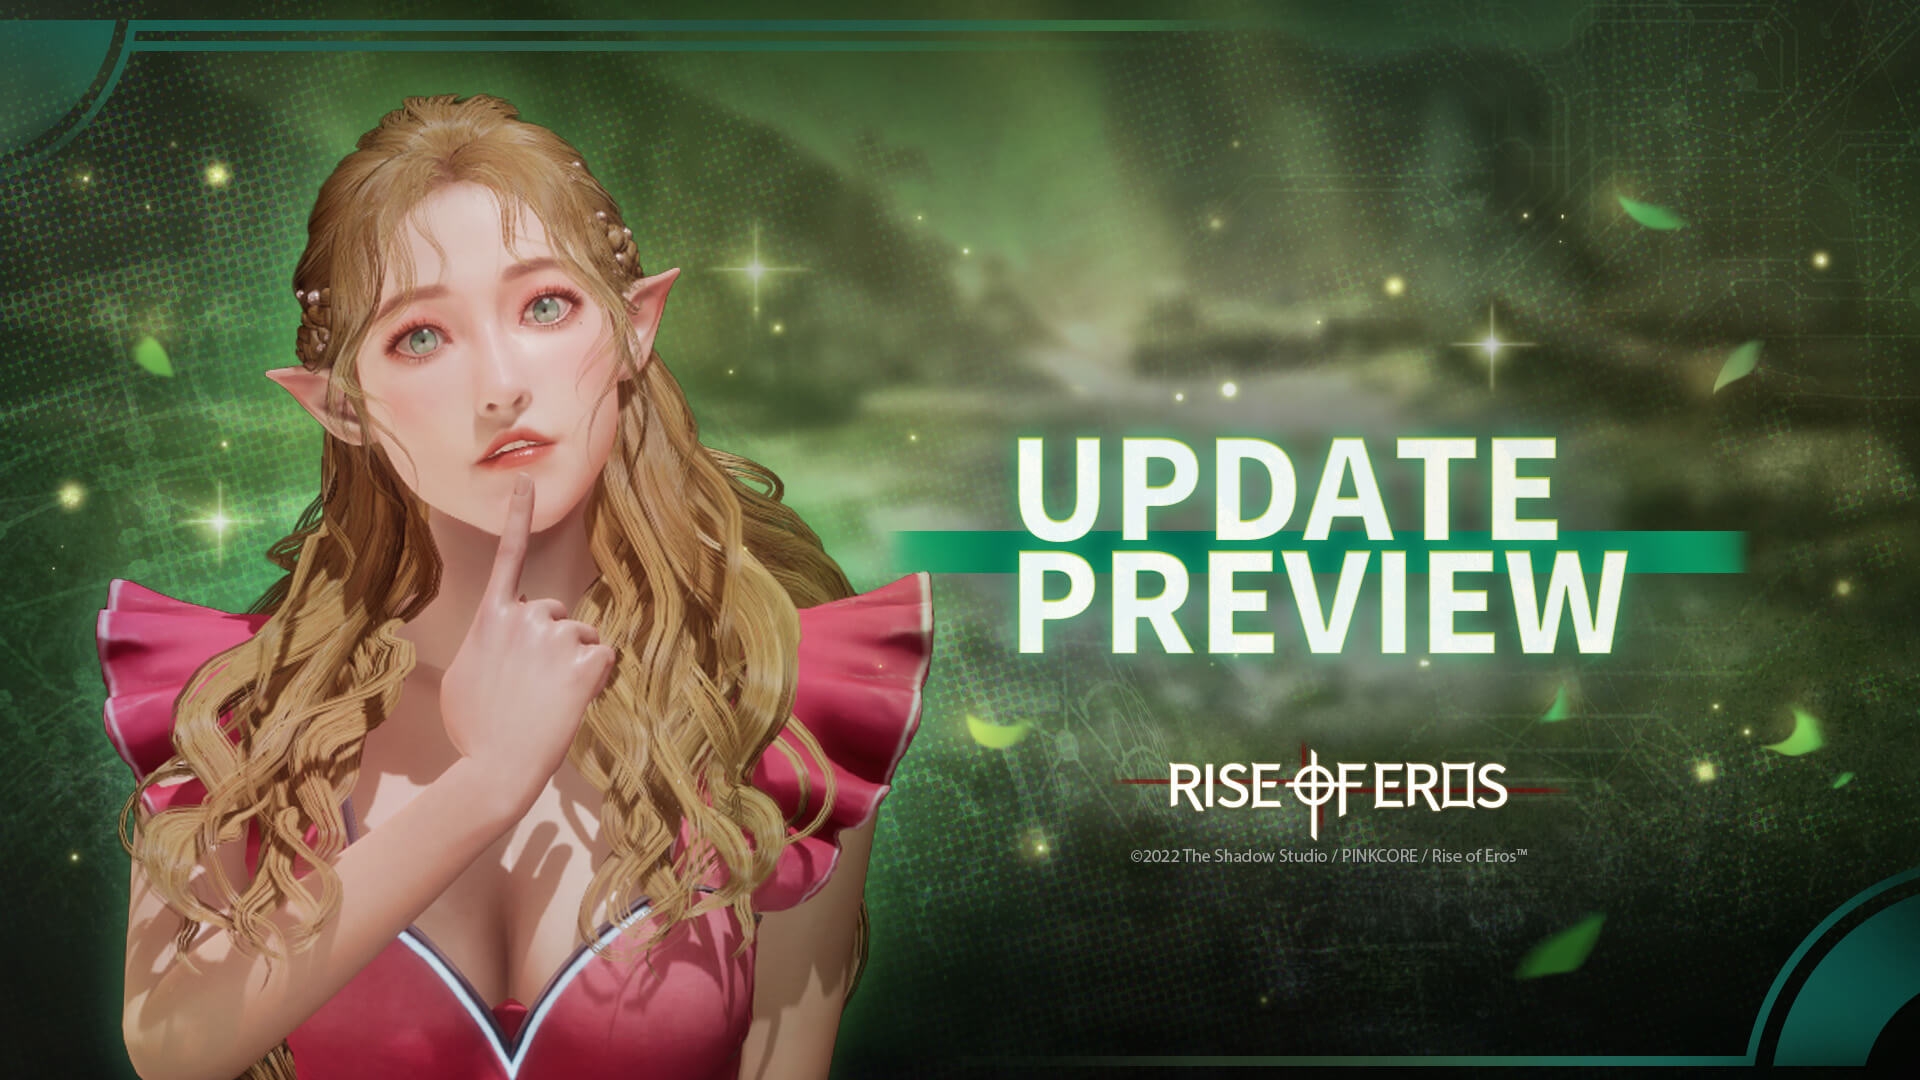 11/10 Update Preview